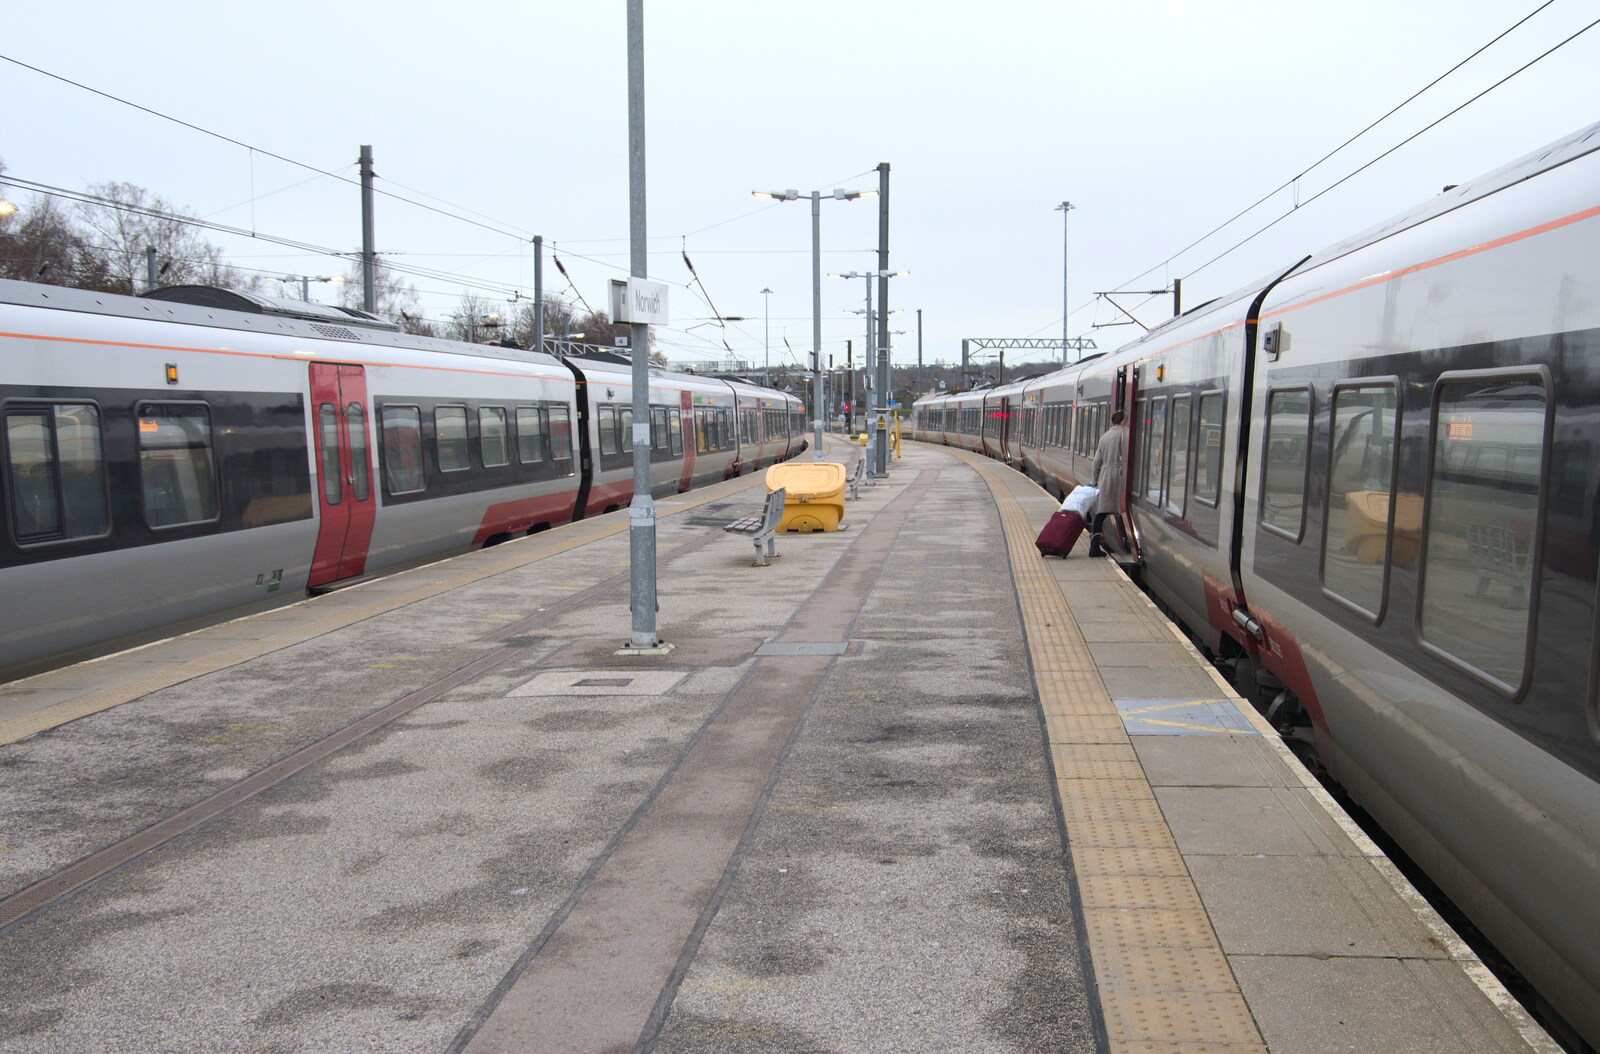 Greater Anglia trains on the platform from Christmas Day and Other Stuff, Diss, Brome and Norwich - 25th December 2022